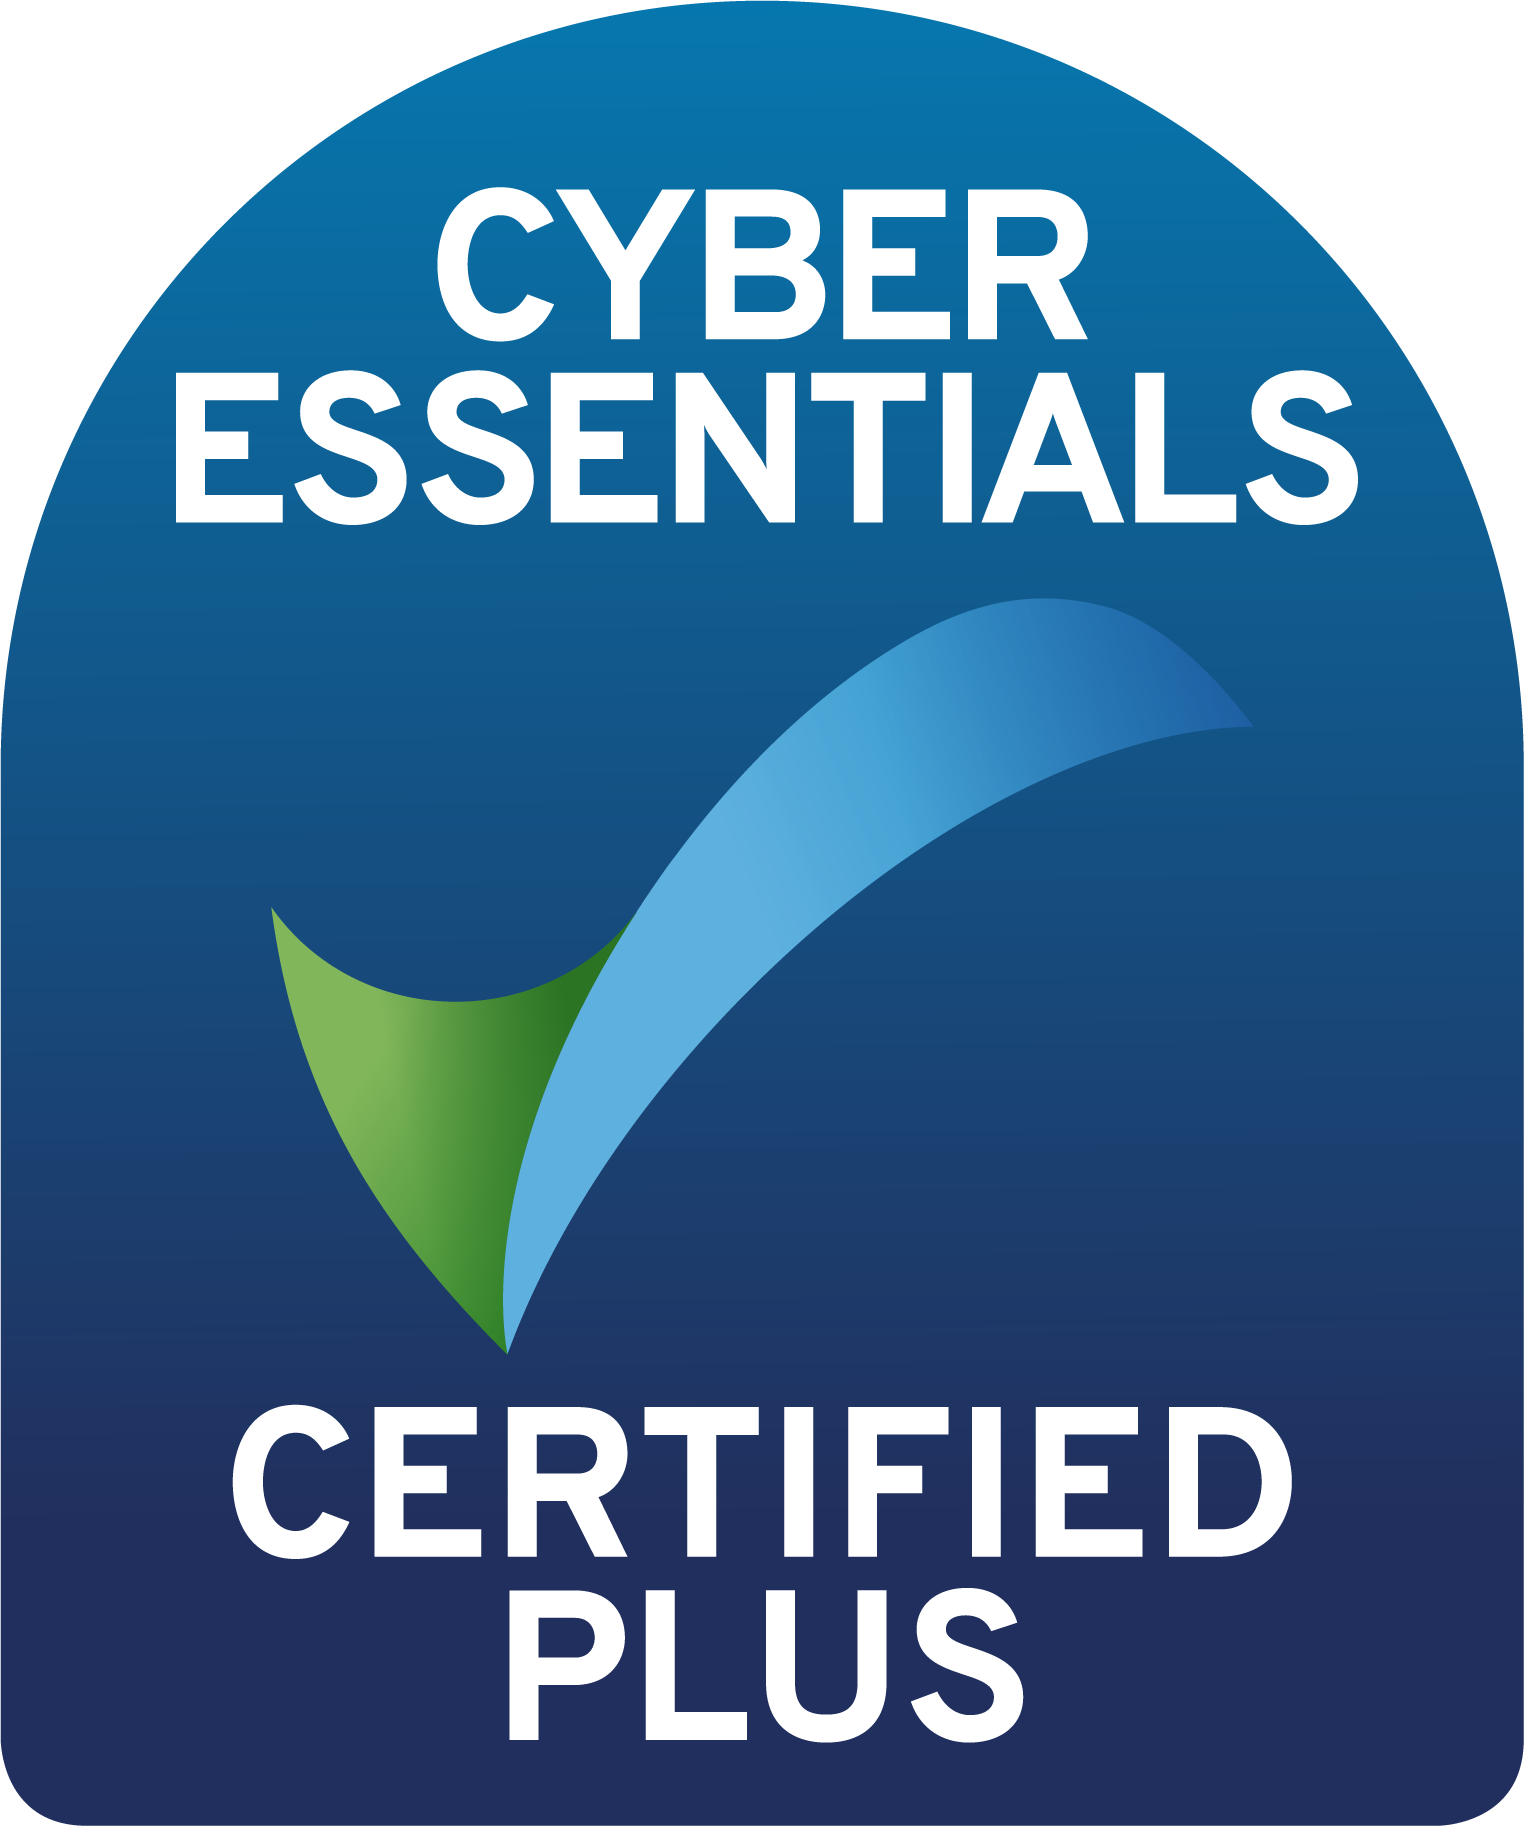 Cyber Essentials Plus Learning Management System Certified